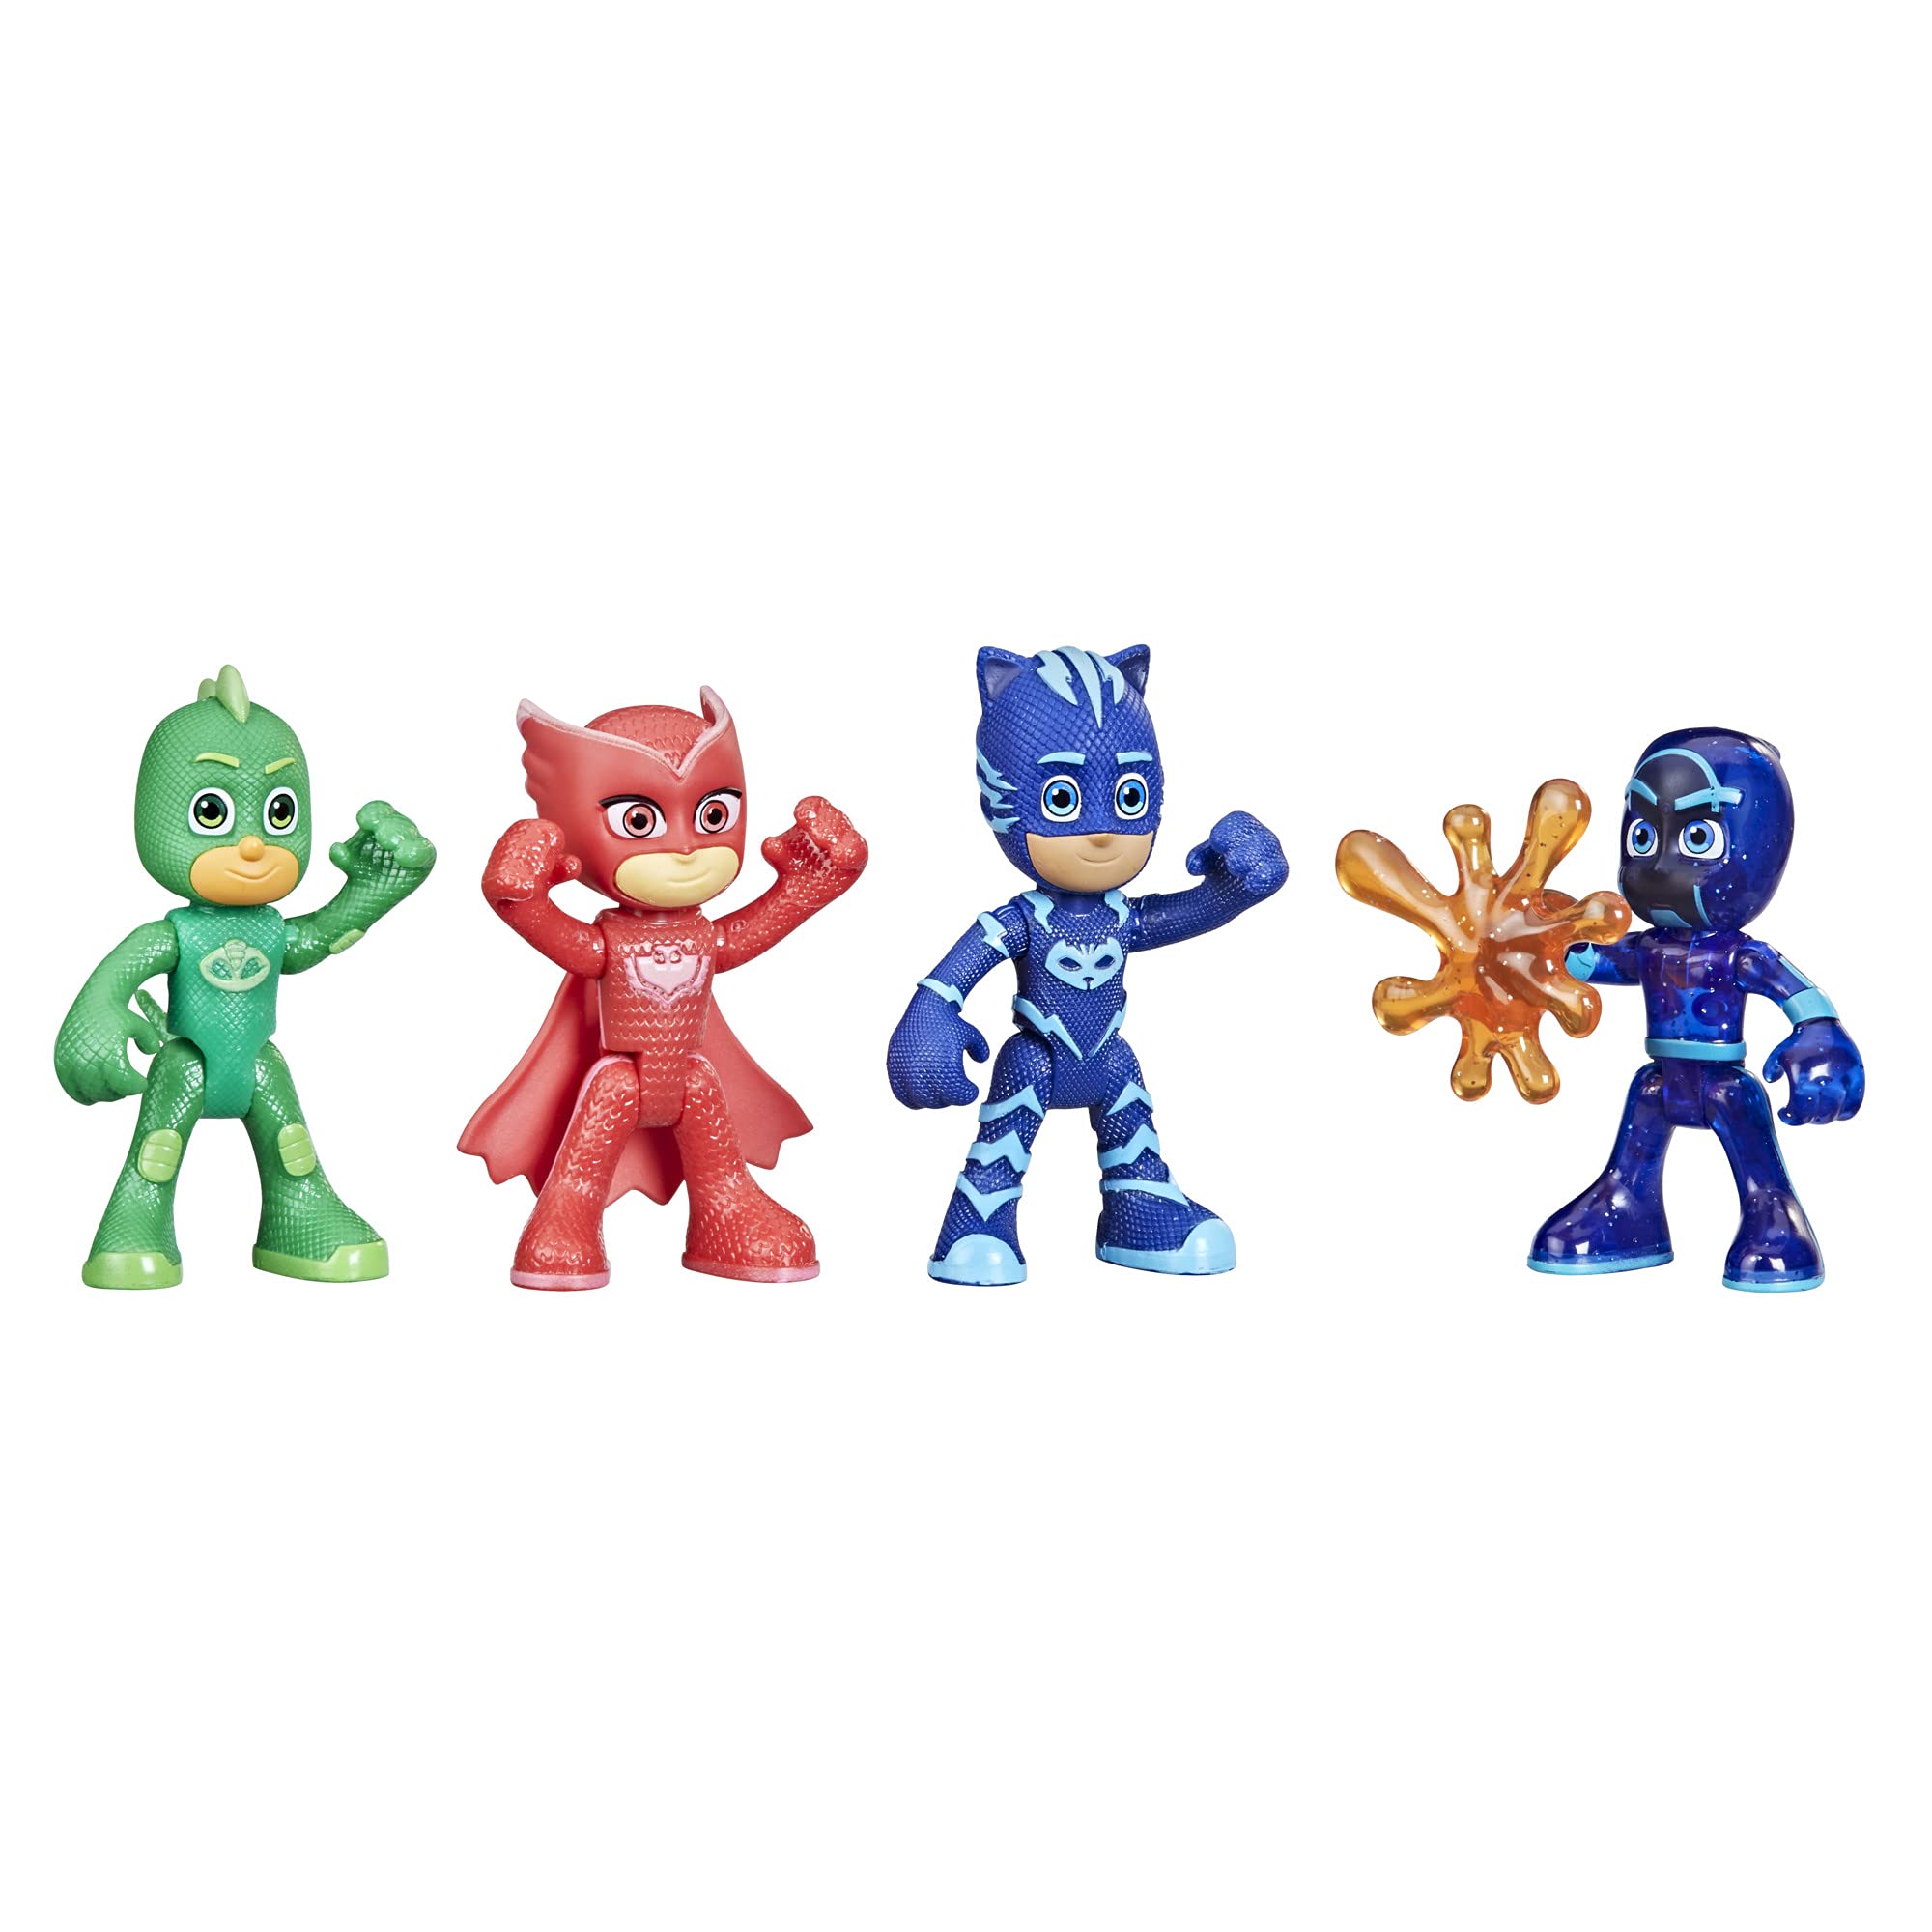 PJ Masks Night Time Mission Glow-in-The-Dark Action Figure Set, Preschool Toy for Kids Ages 3 and Up, 4 Figures and 1 Accessory